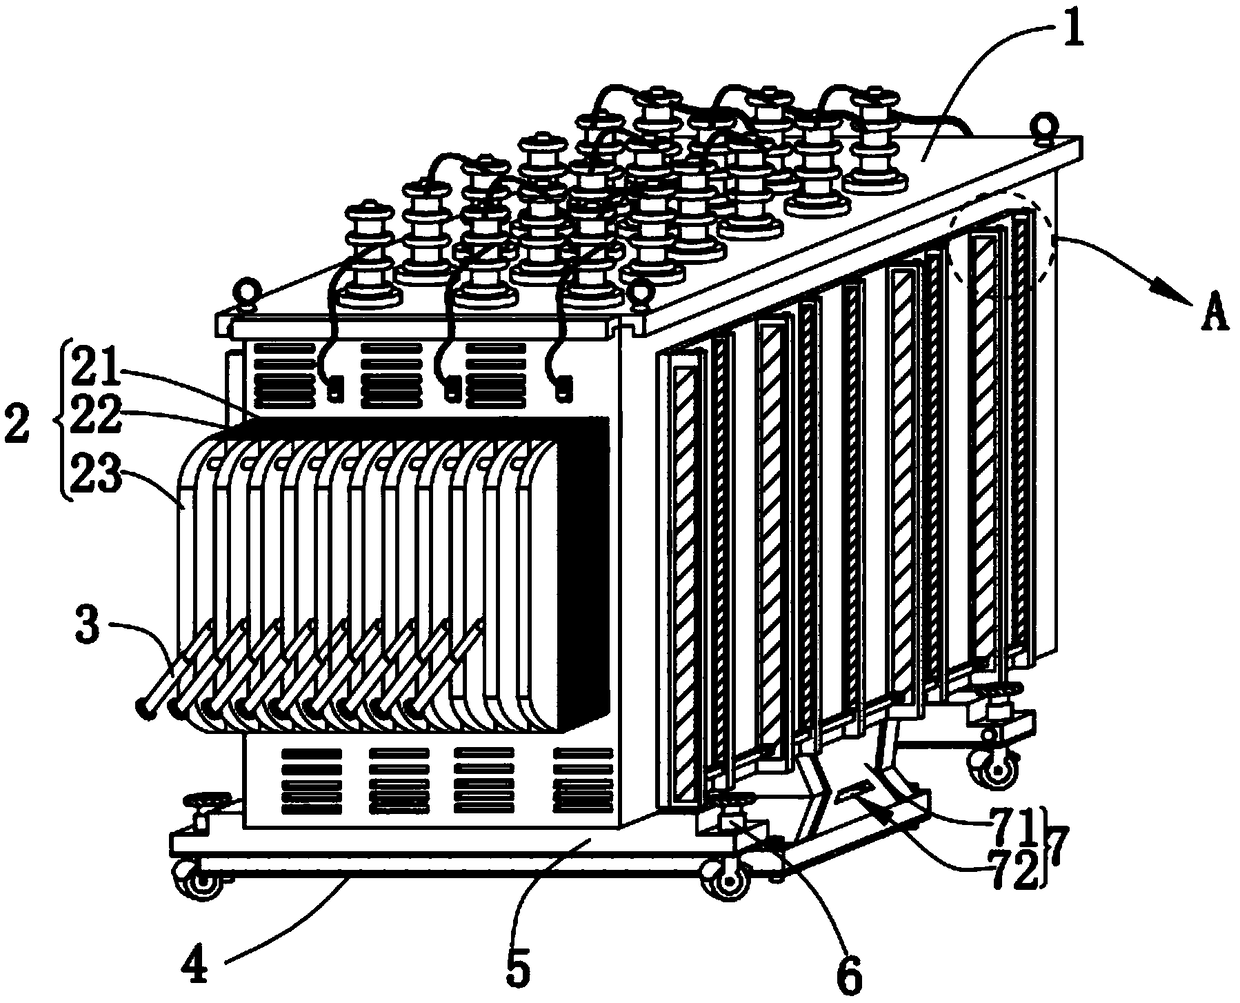 A high-speed railway vehicle-mounted isolation transformer